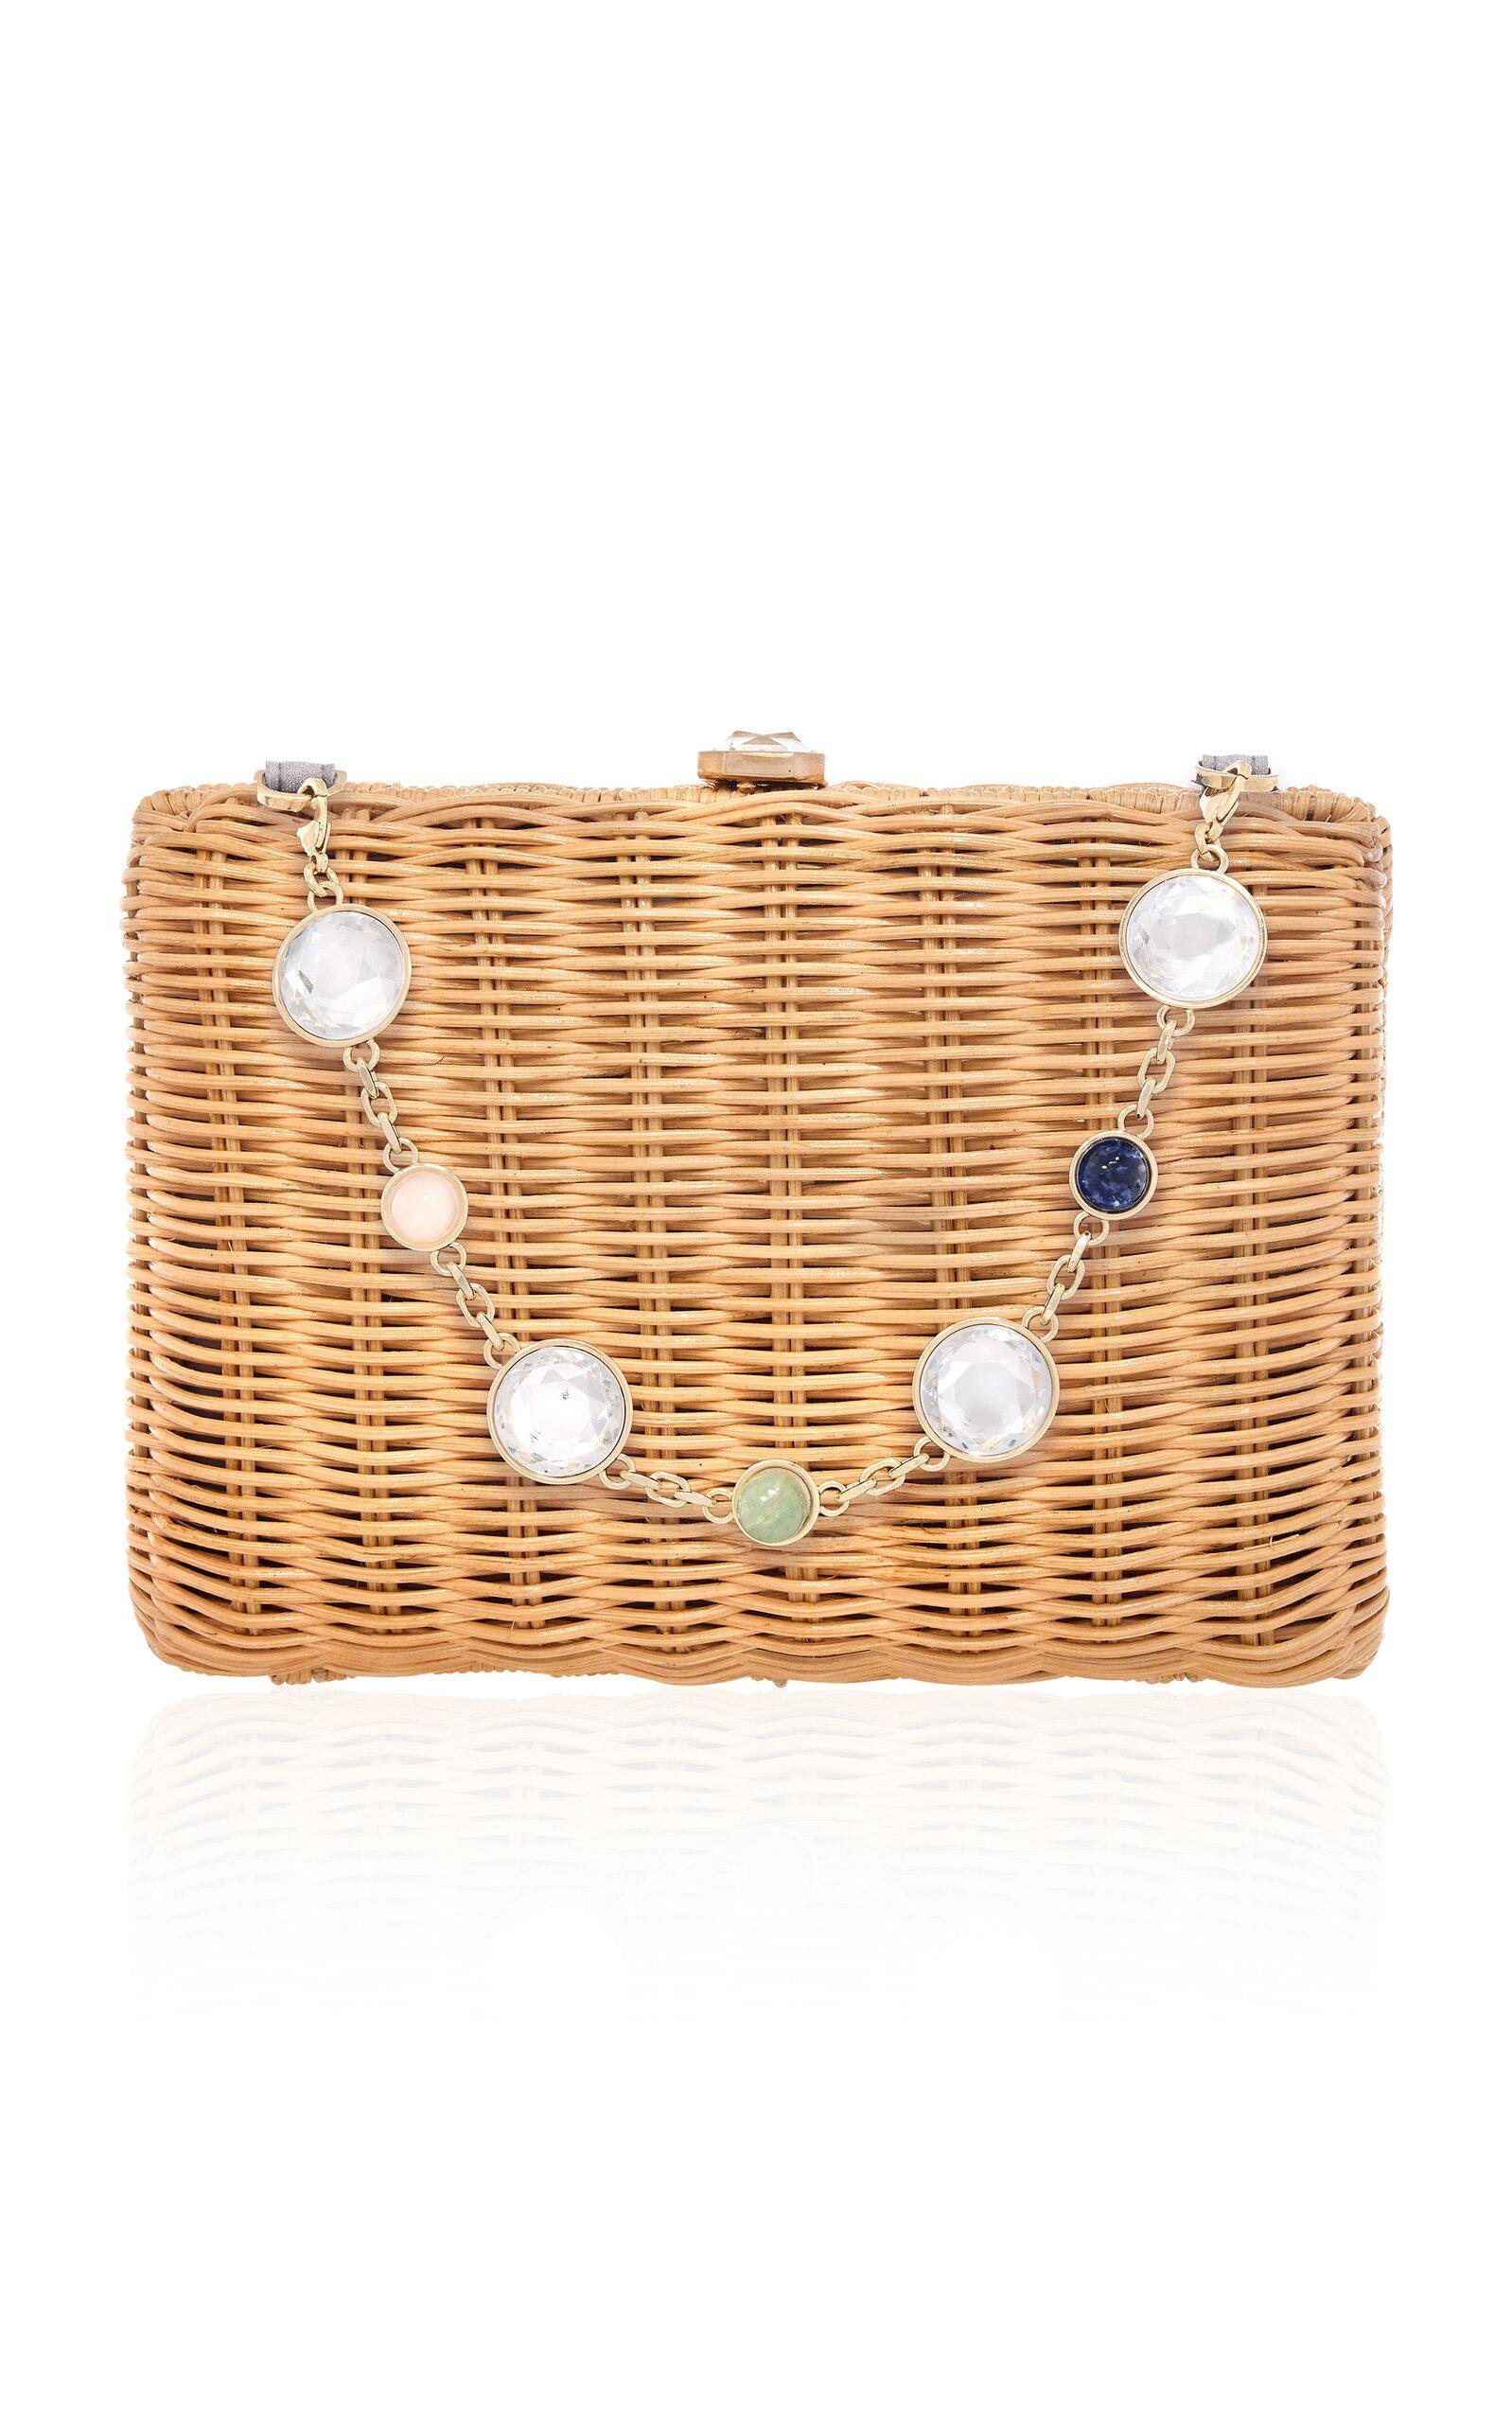 Judith Leiber Couture - Hailey Stone-Embellished Wicker Basket Clutch - Neutral - OS - Only At Moda Operandi by JUDITH LEIBER COUTURE